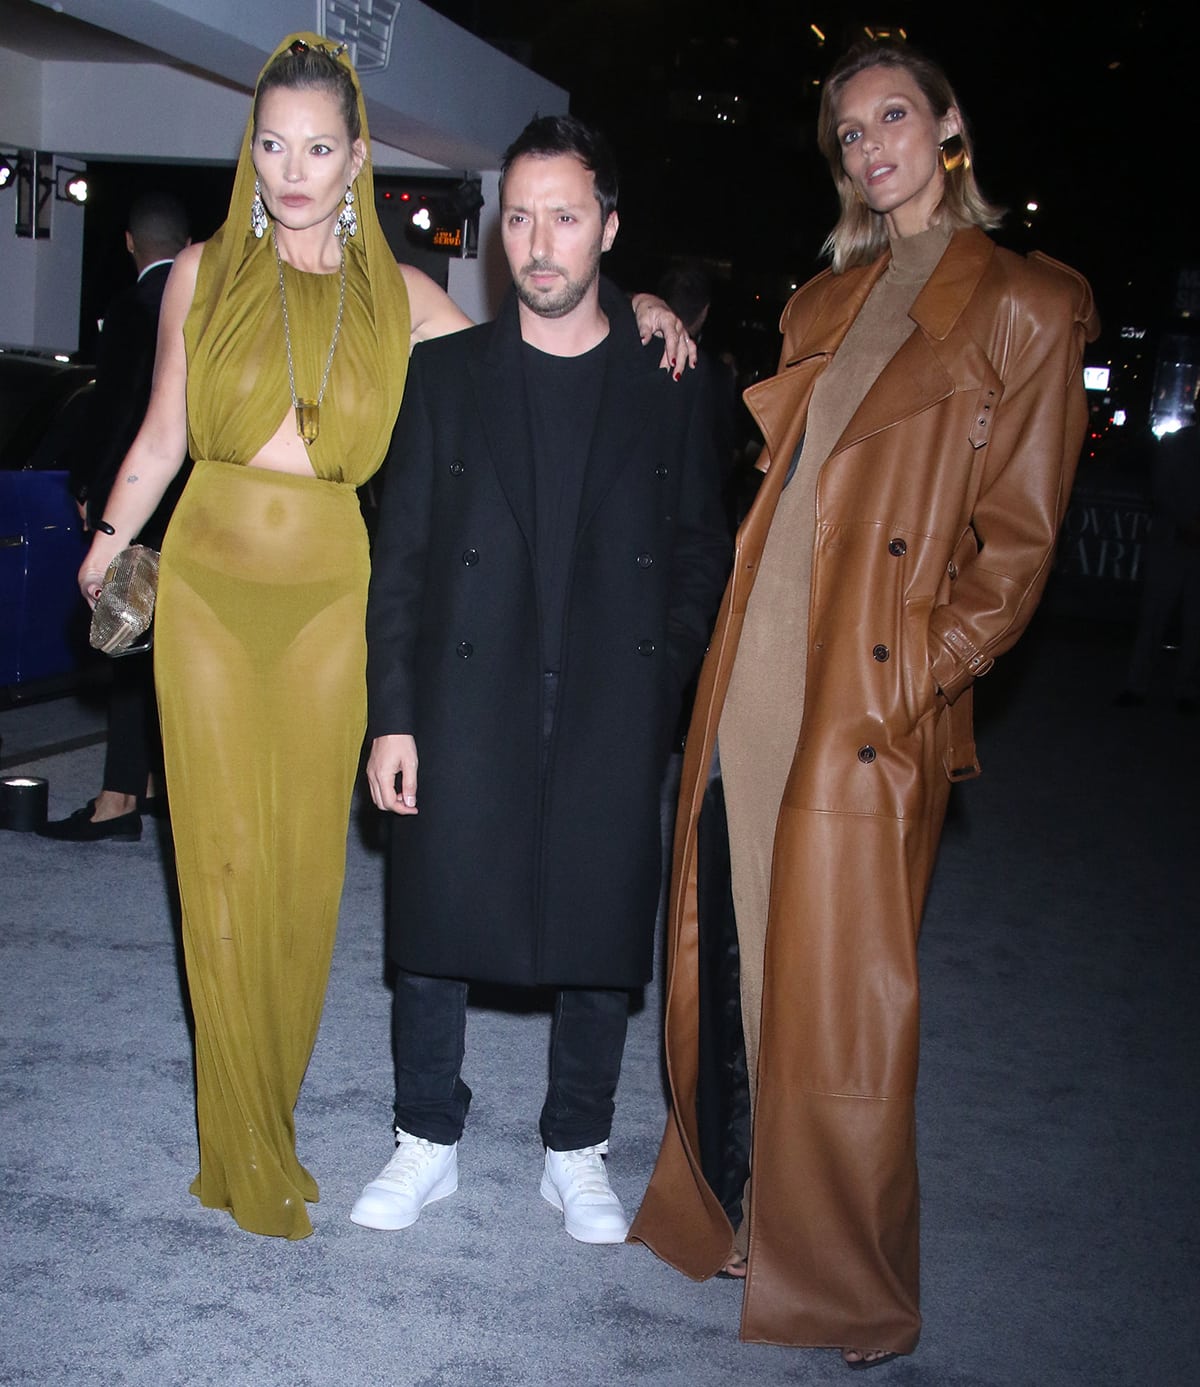 Kate Moss, Anthony Vaccarello, and Anja Rubik at the Wall Street Journal Magazine 2022 Innovator Awards held at the Museum of Modern Art on November 2, 2022